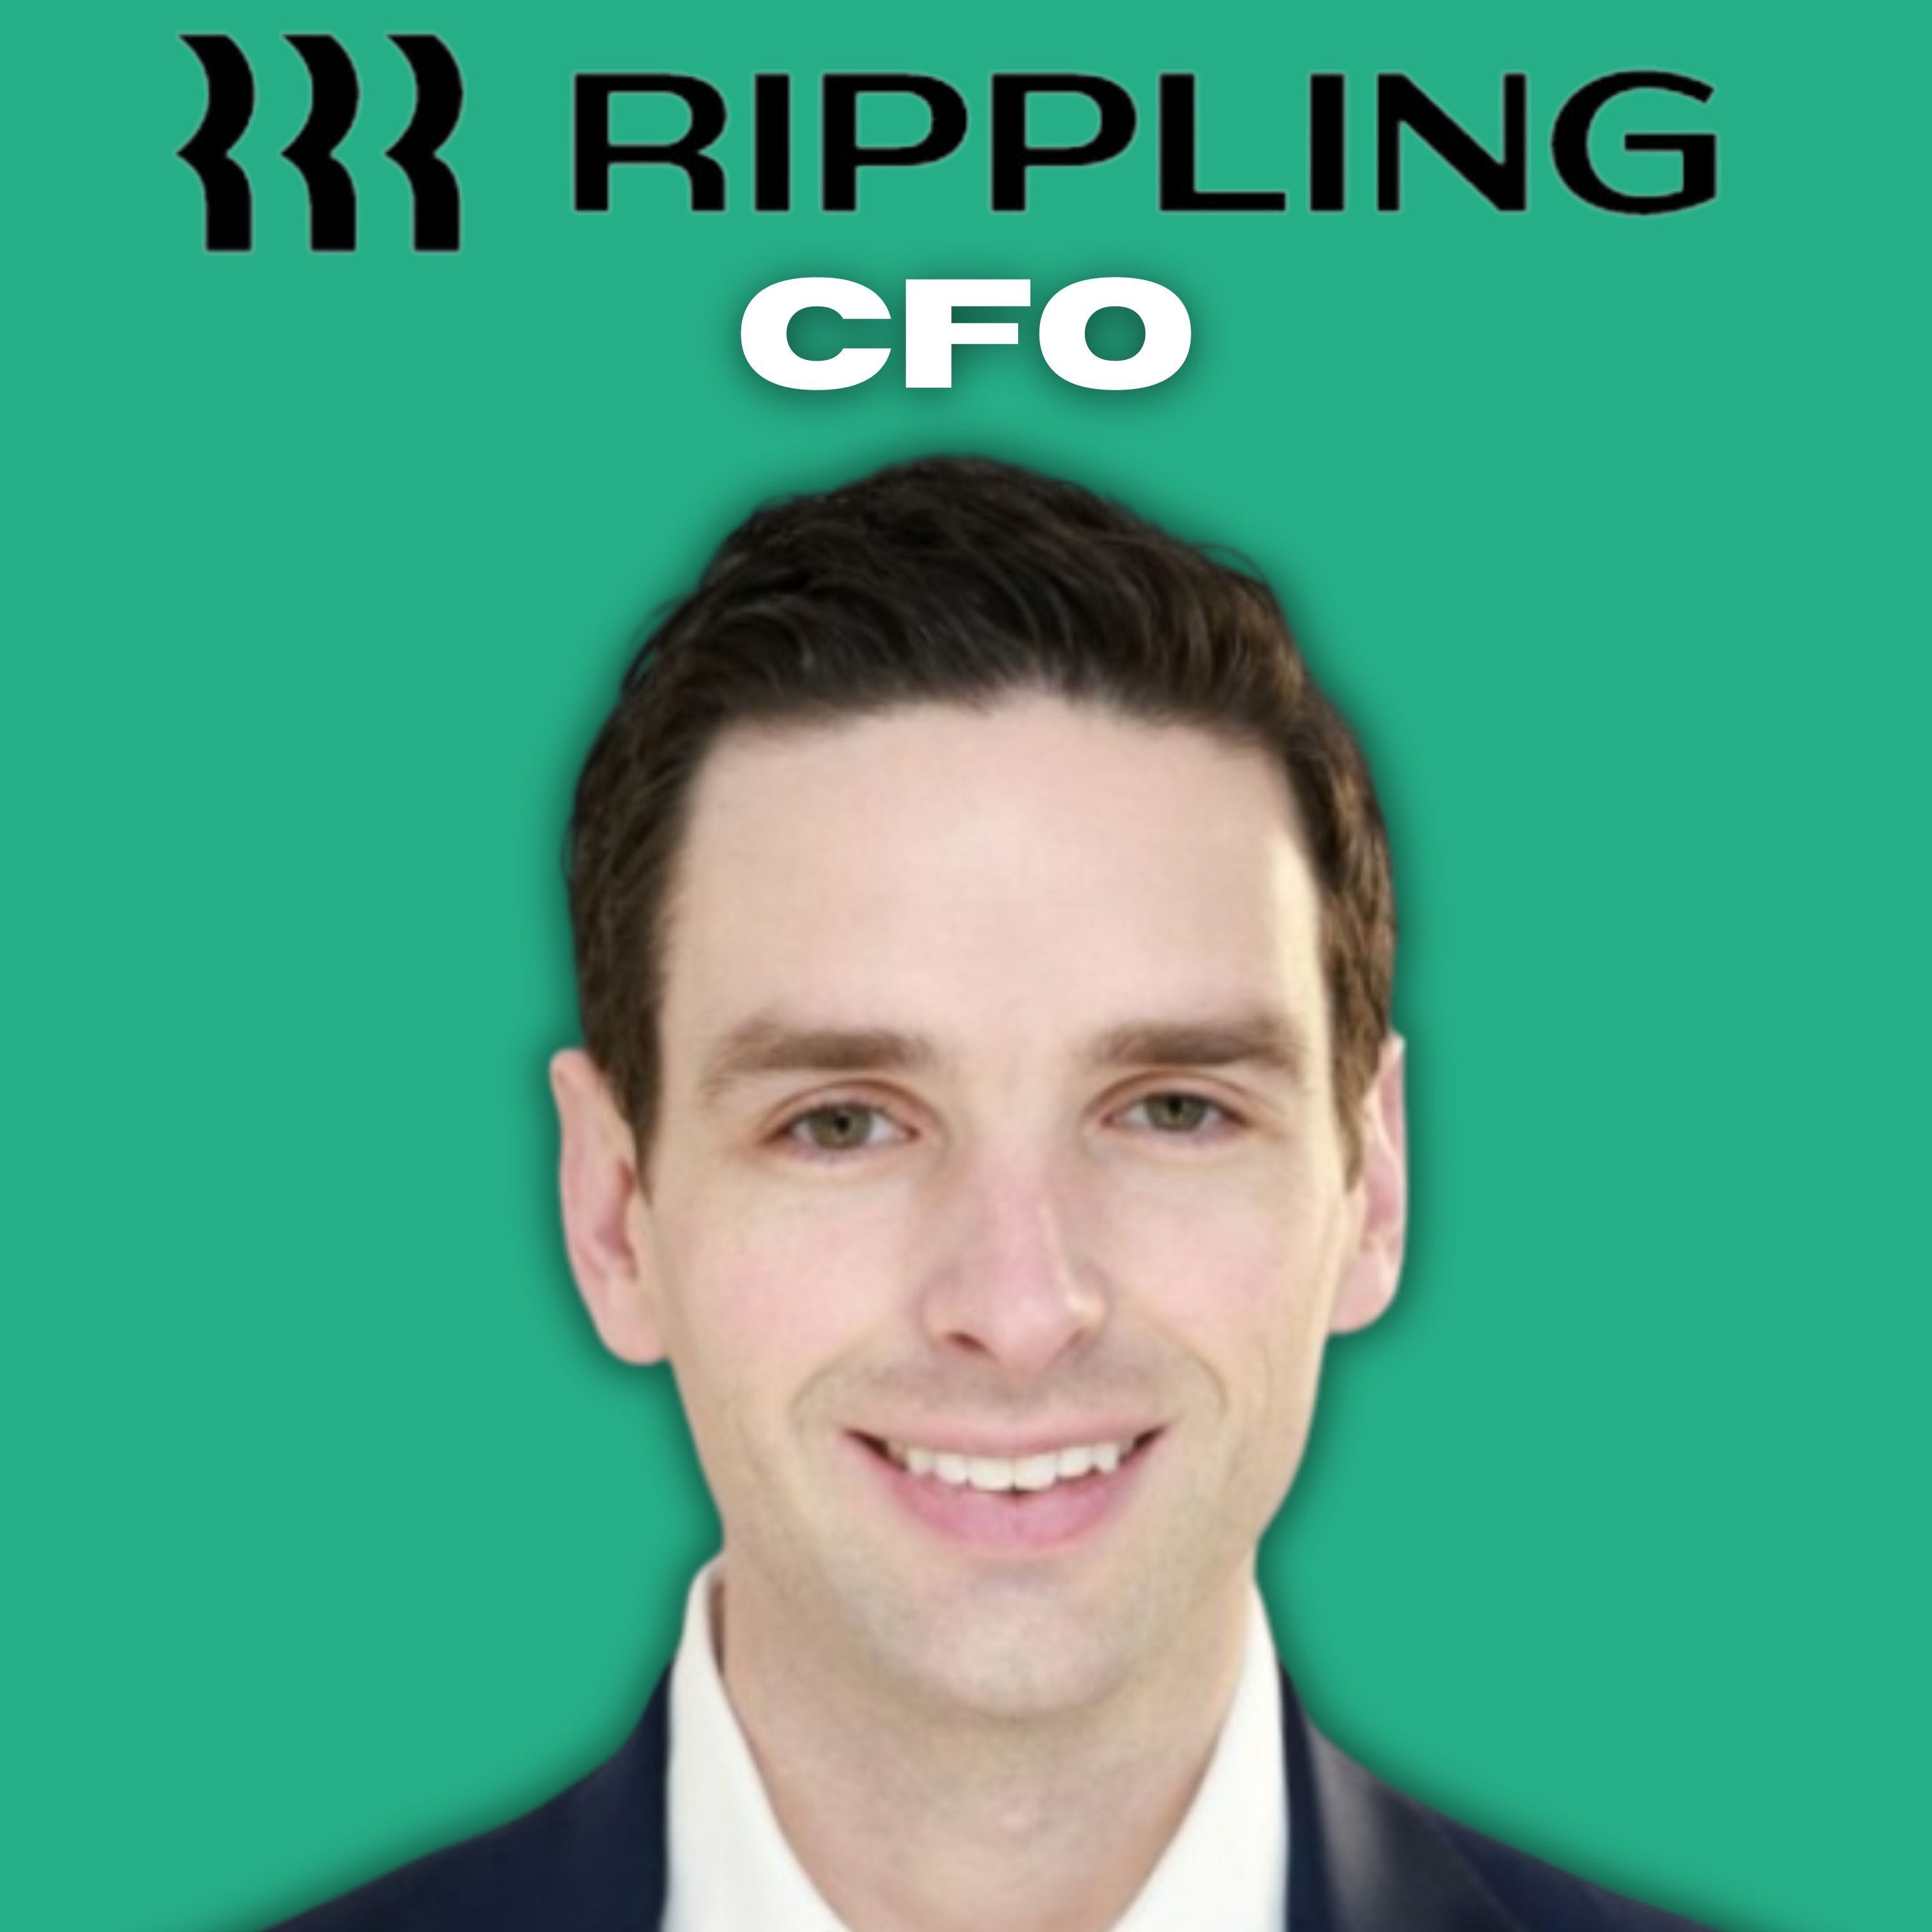 Rippling CFO Adam Swiecicki on Building a Compound Startup and Channeling Ambition